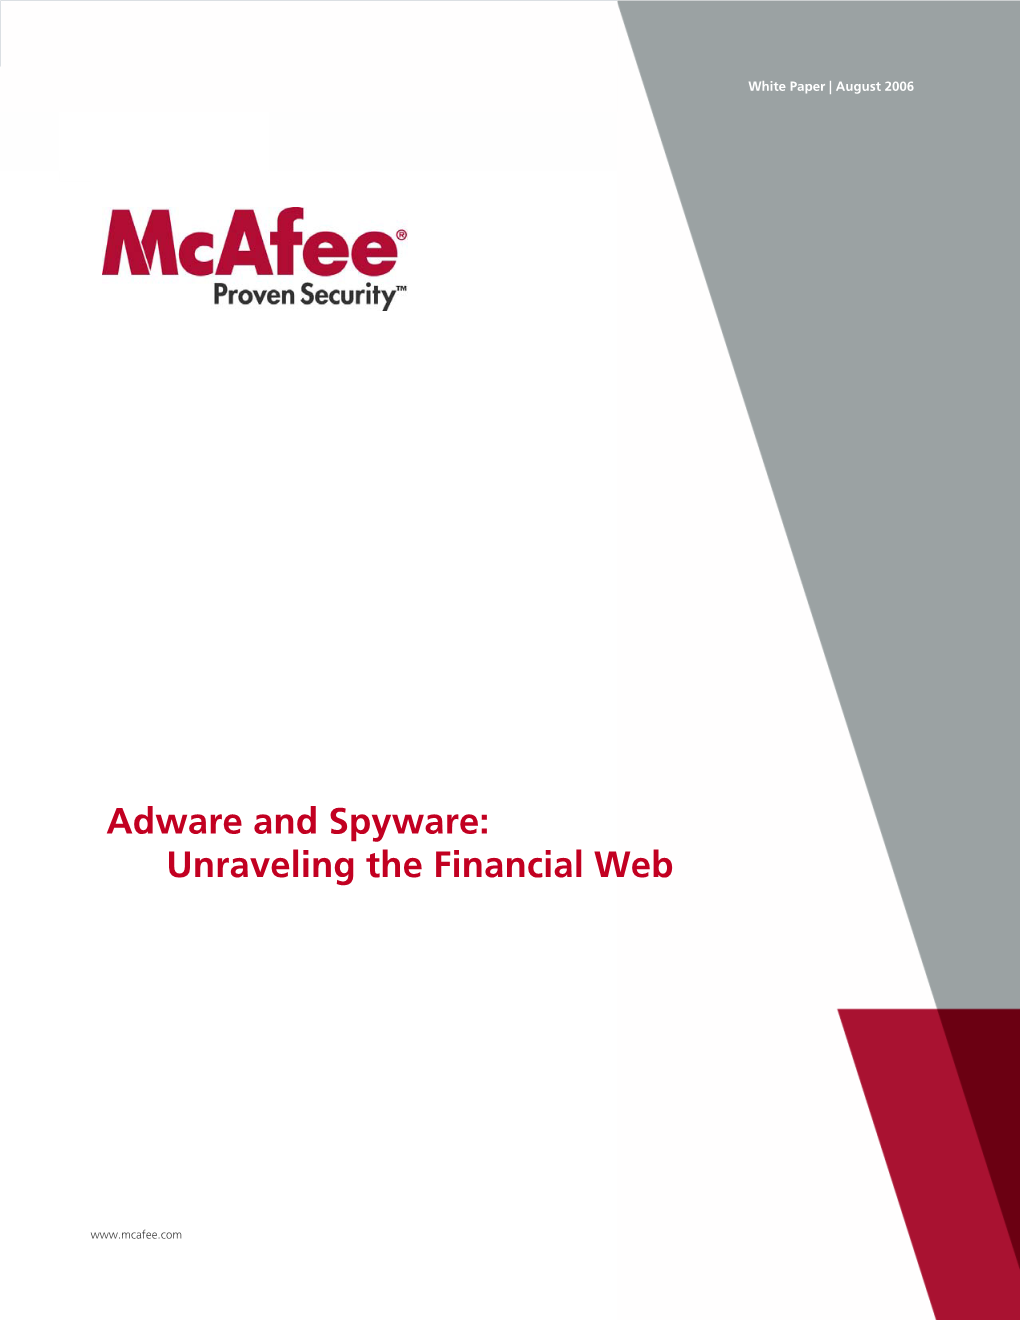 Adware and Spyware: Unraveling the Financial Web